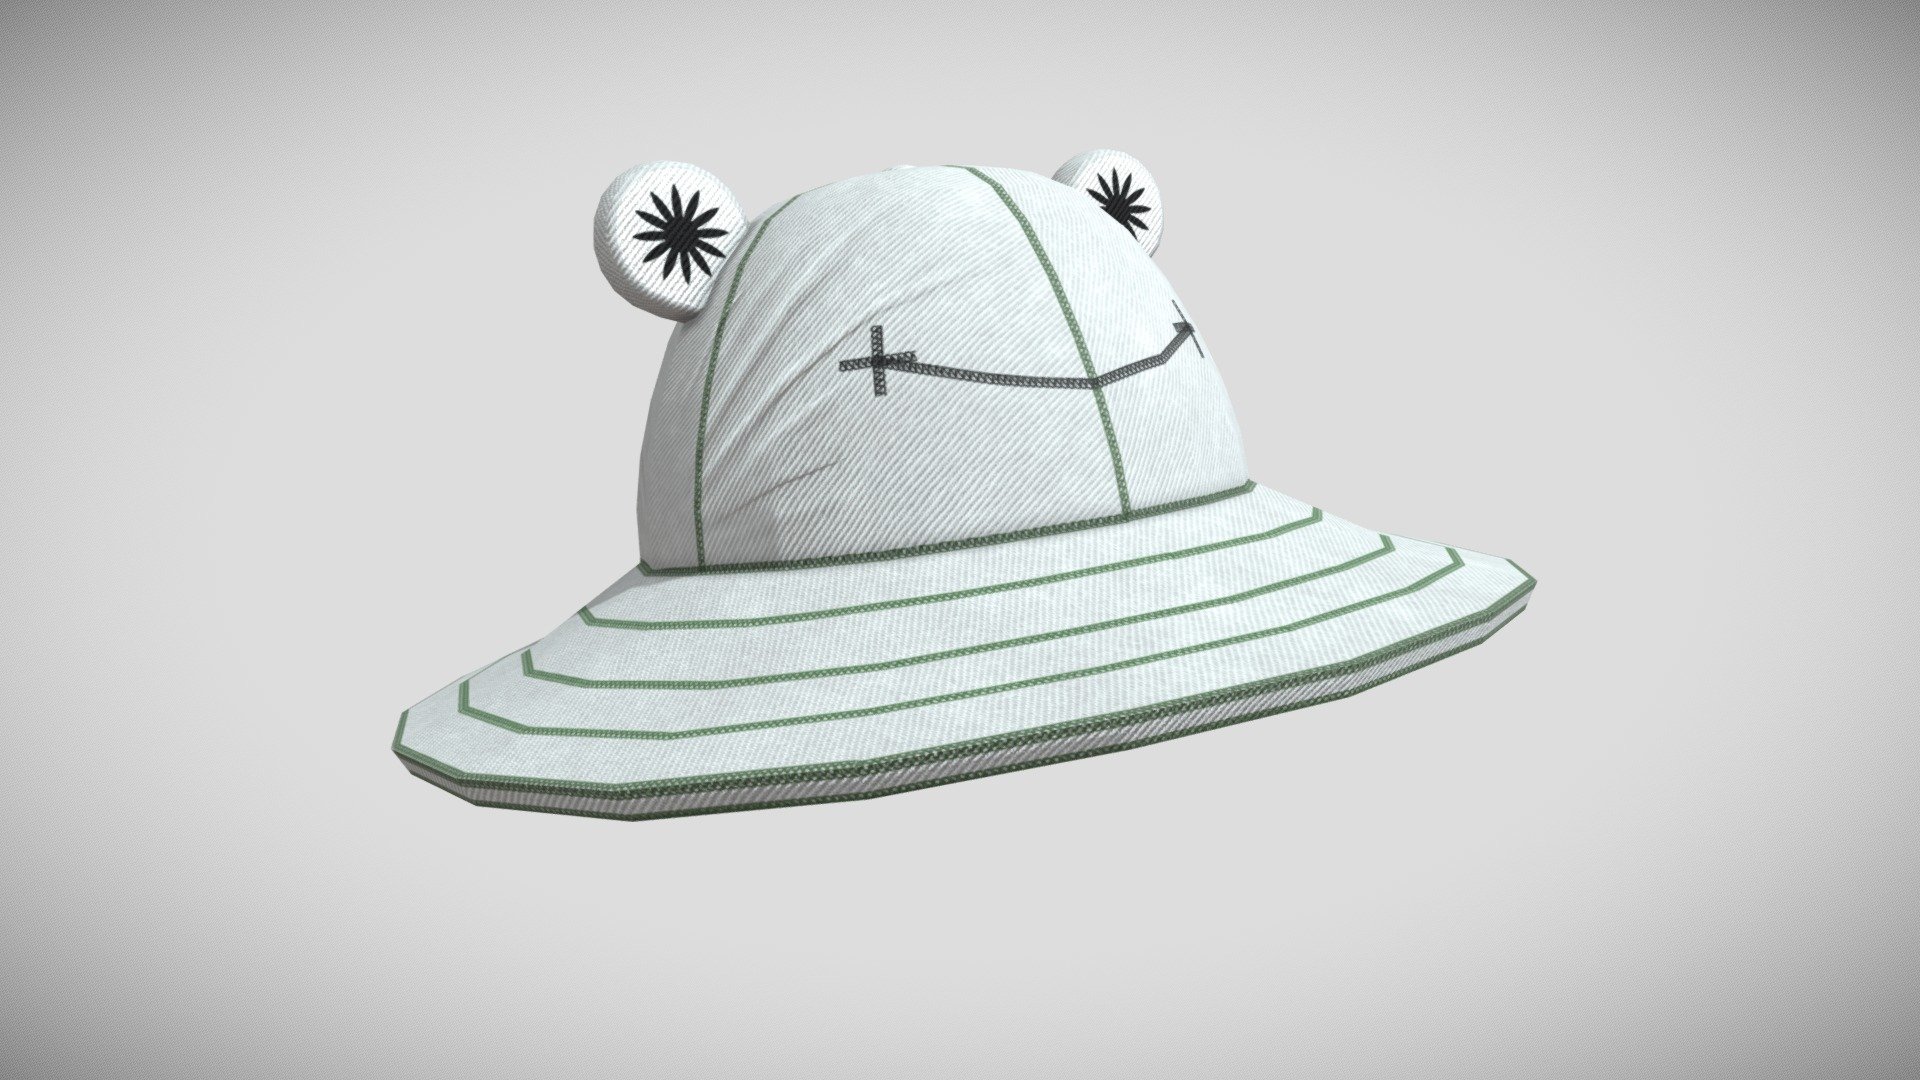 A bucket hat with smily frog. I made 3 versions of the hat, this is the White version. The others can be found here:

Black:
https://sketchfab.com/3d-models/black-frog-hat-00f9dd4c828145549a193a448857191a

Green:
https://sketchfab.com/3d-models/green-frog-hat-f1dc04e89d594c5f9c6beb9a76652660

Modelled in Maya, textured in Substance Painter, entirely by me 3d model